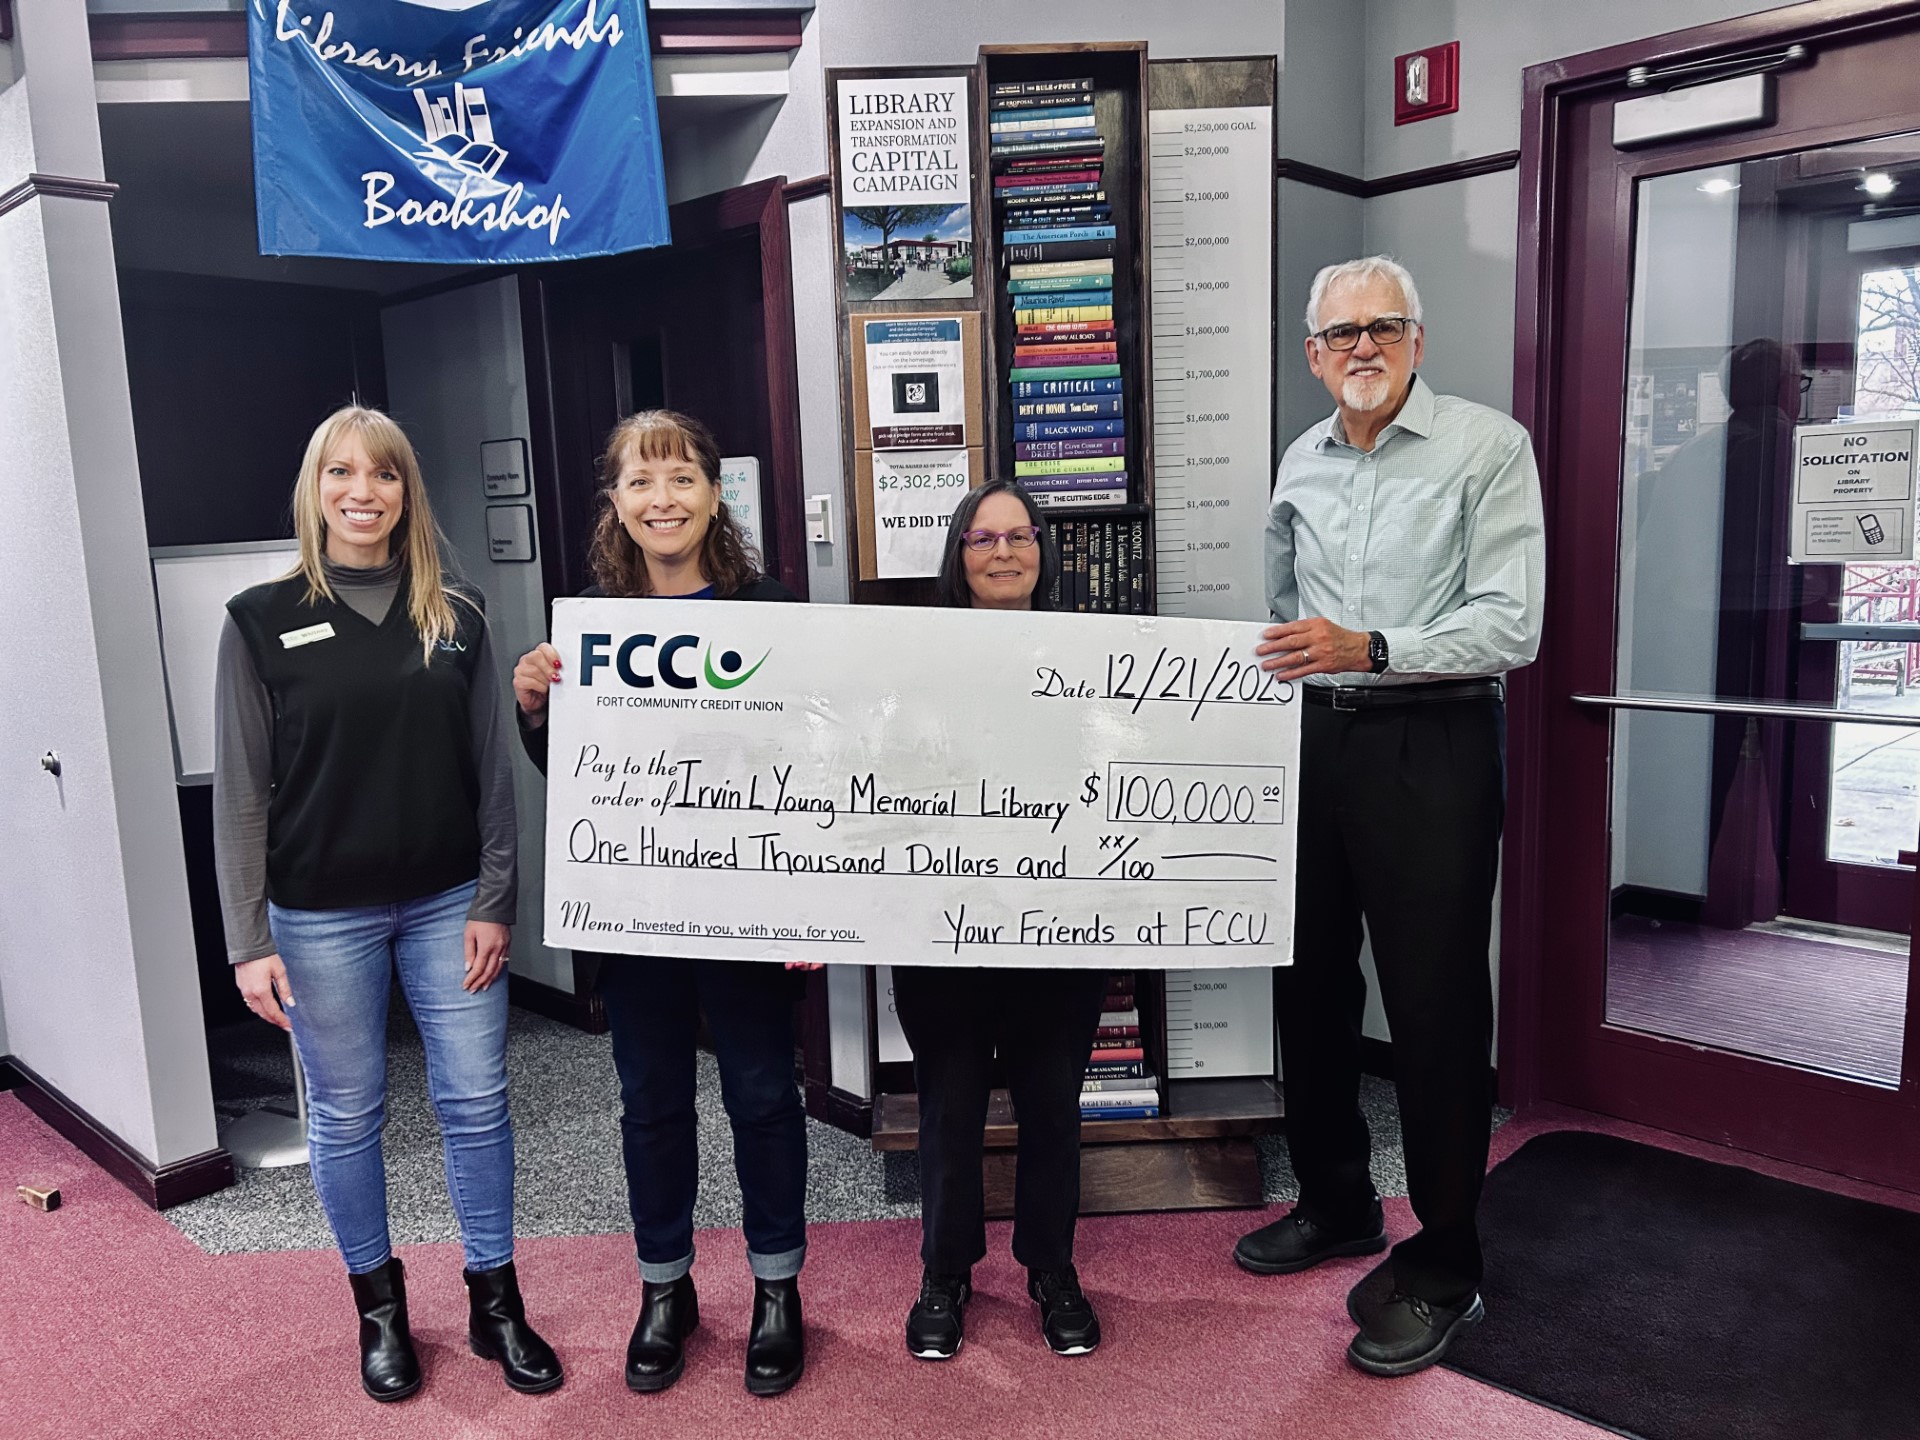 Whitney Townsend (Director of Business & Community Development at FCCU), Sue Johnson (President and CEO of FCCU), Diane Jaroch (interim Irvin L. Young Memorial Library Director), and Jim Winship (Chair, Campaign Planning Committee)